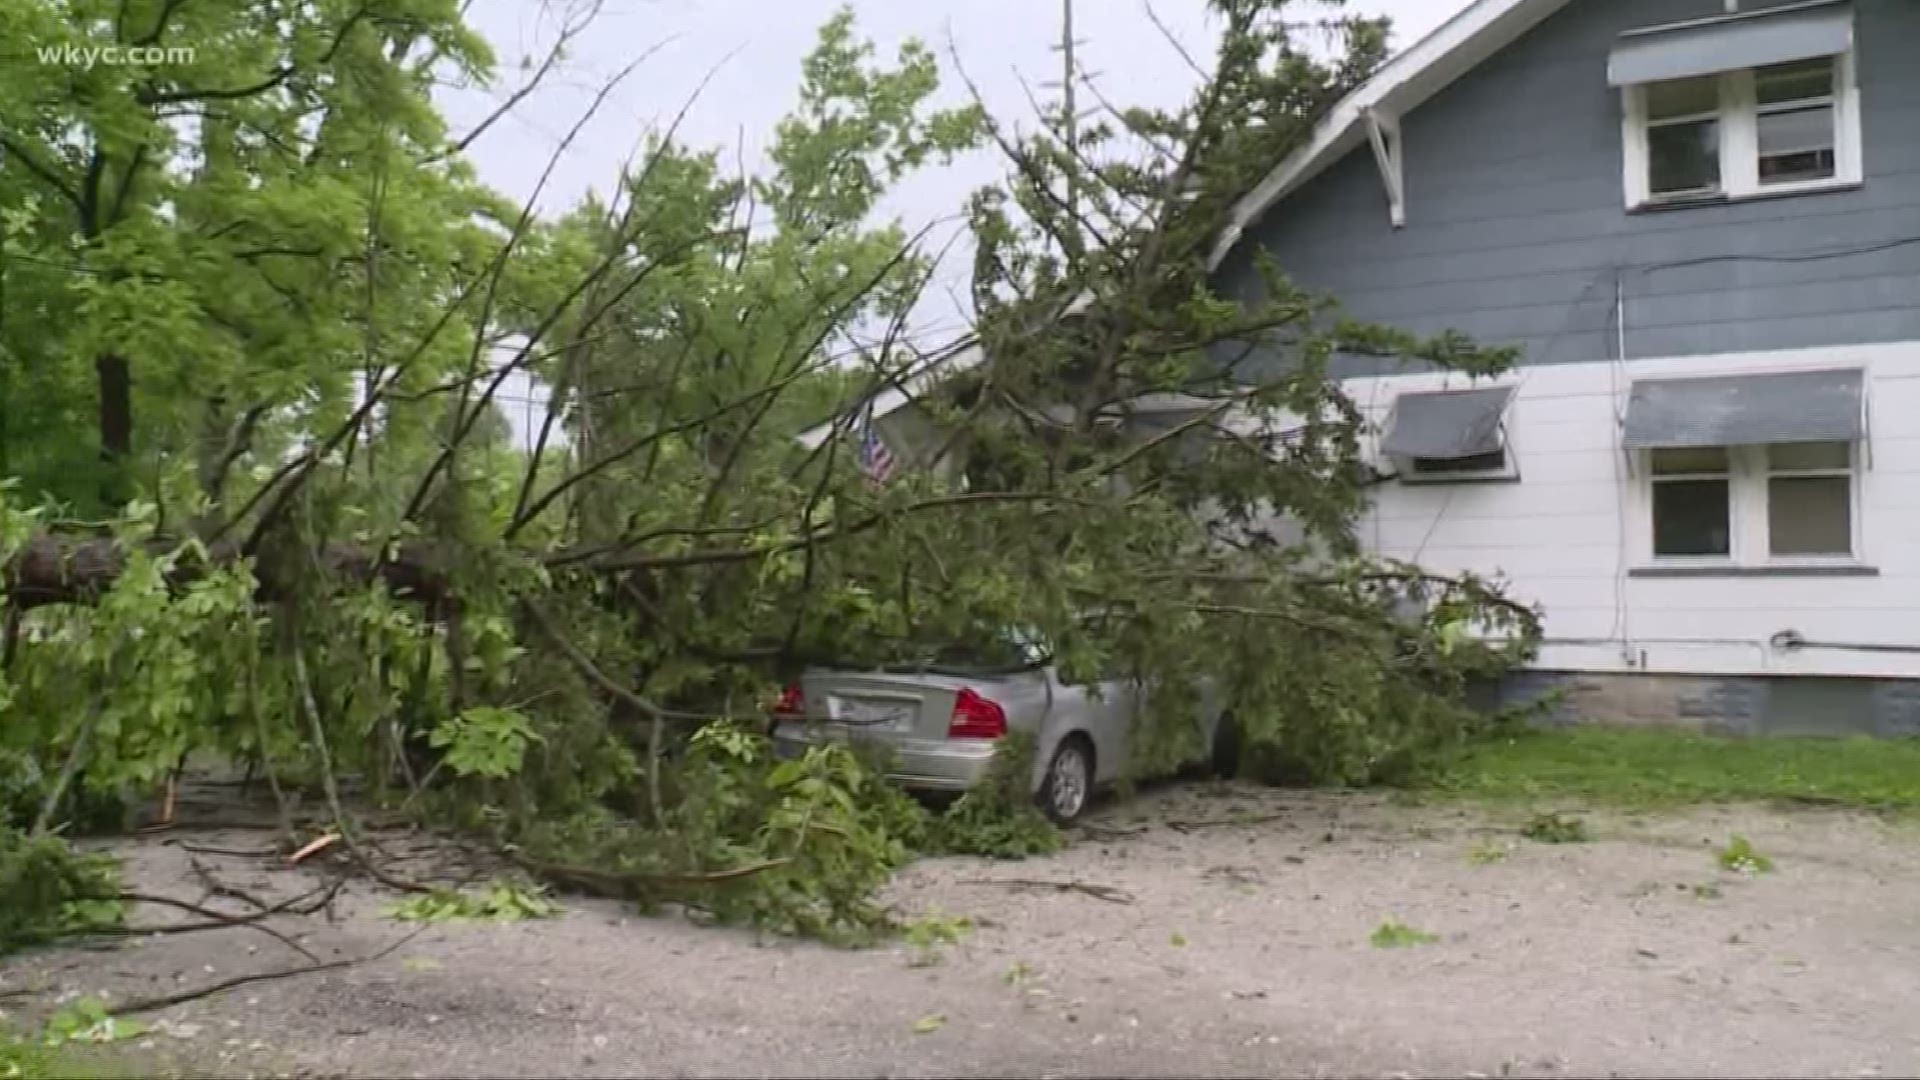 June 16, 2019: The National Weather Service has confirmed an EF-1 tornado with peak winds of 90 mph hit a portion of Cuyahoga County in Sunday's afternoon storms. This tornado, which traveled more than two miles, hit near Glenwillow.